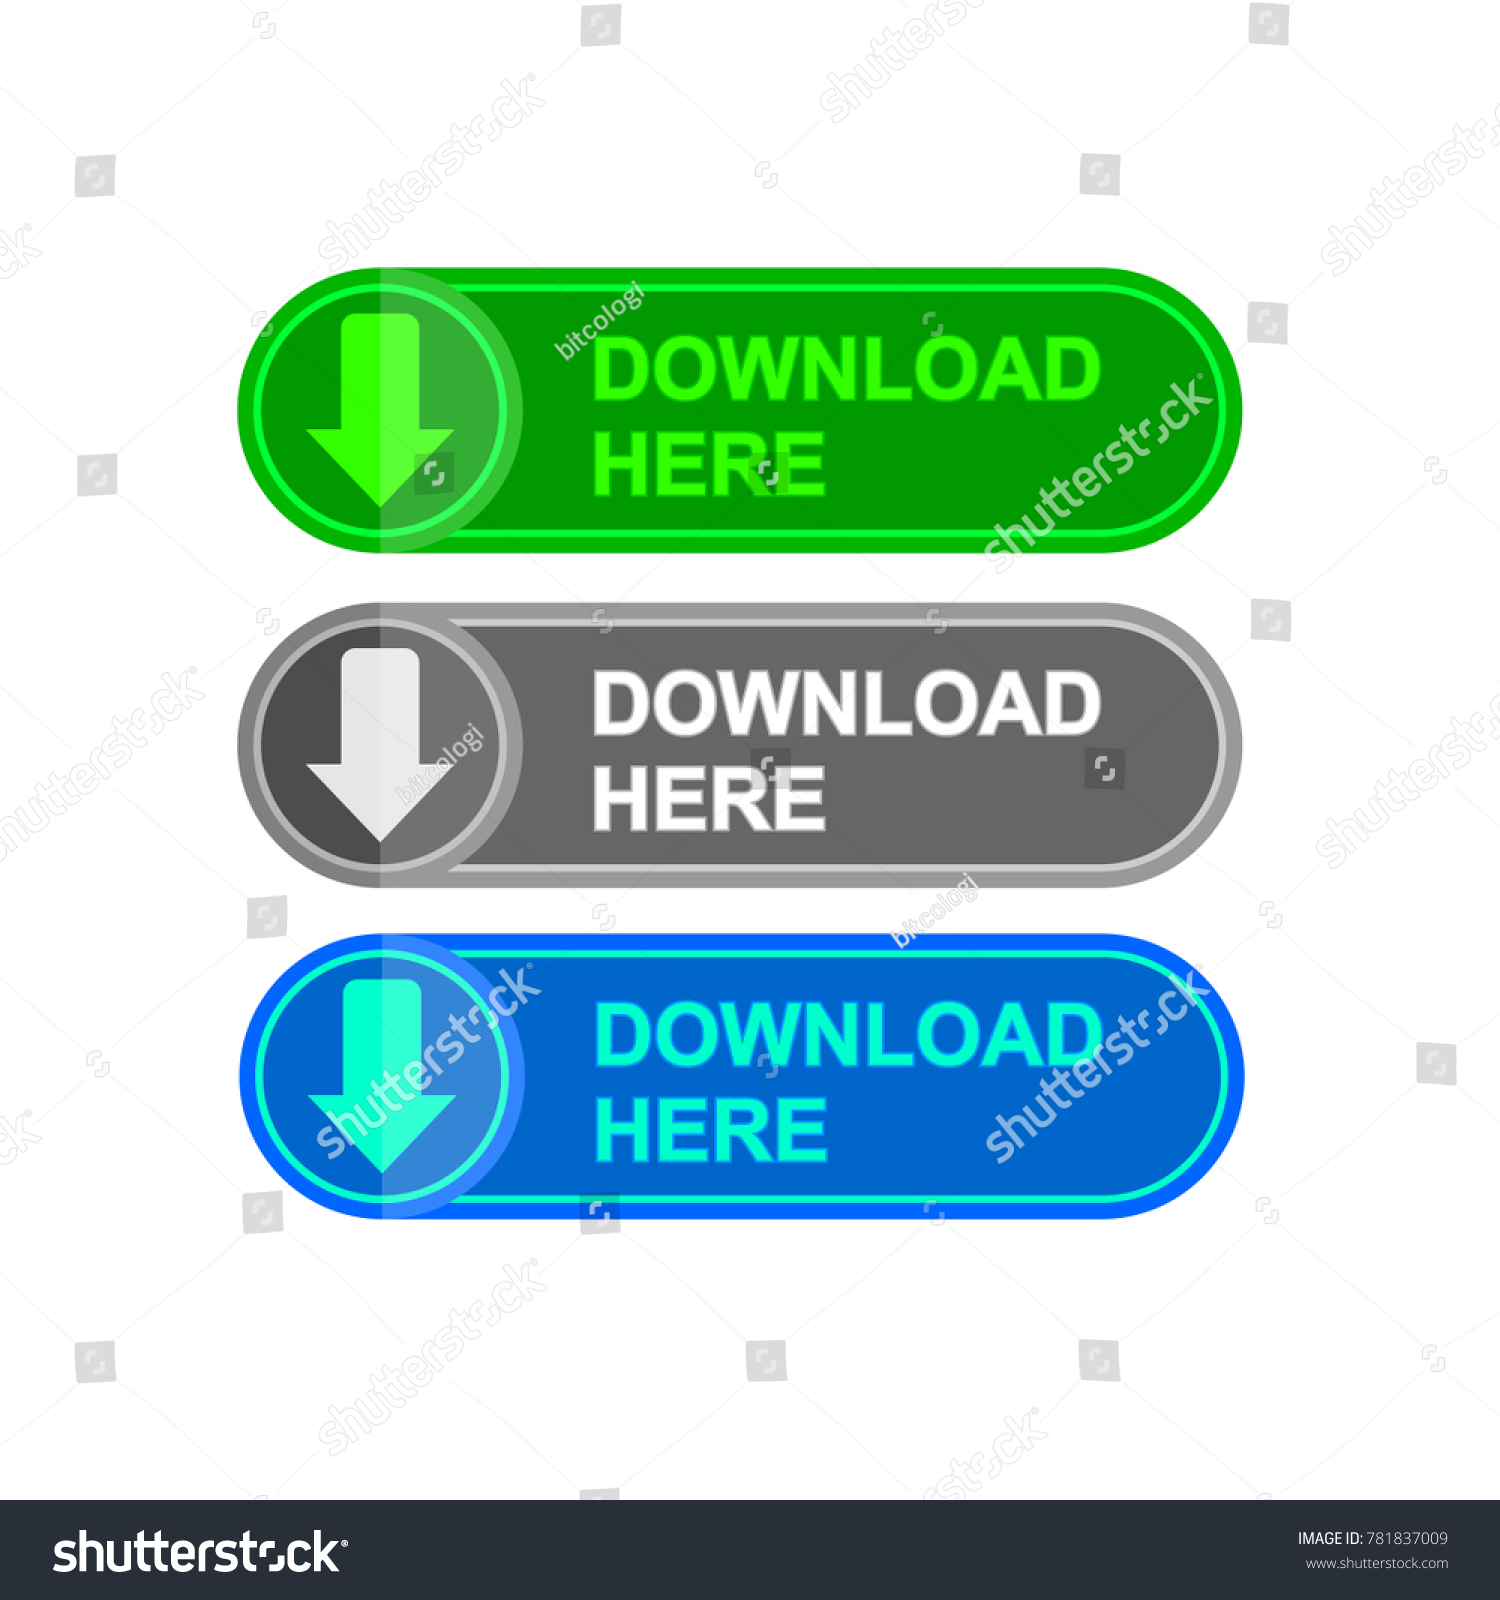 Simple Download Icon #781837009